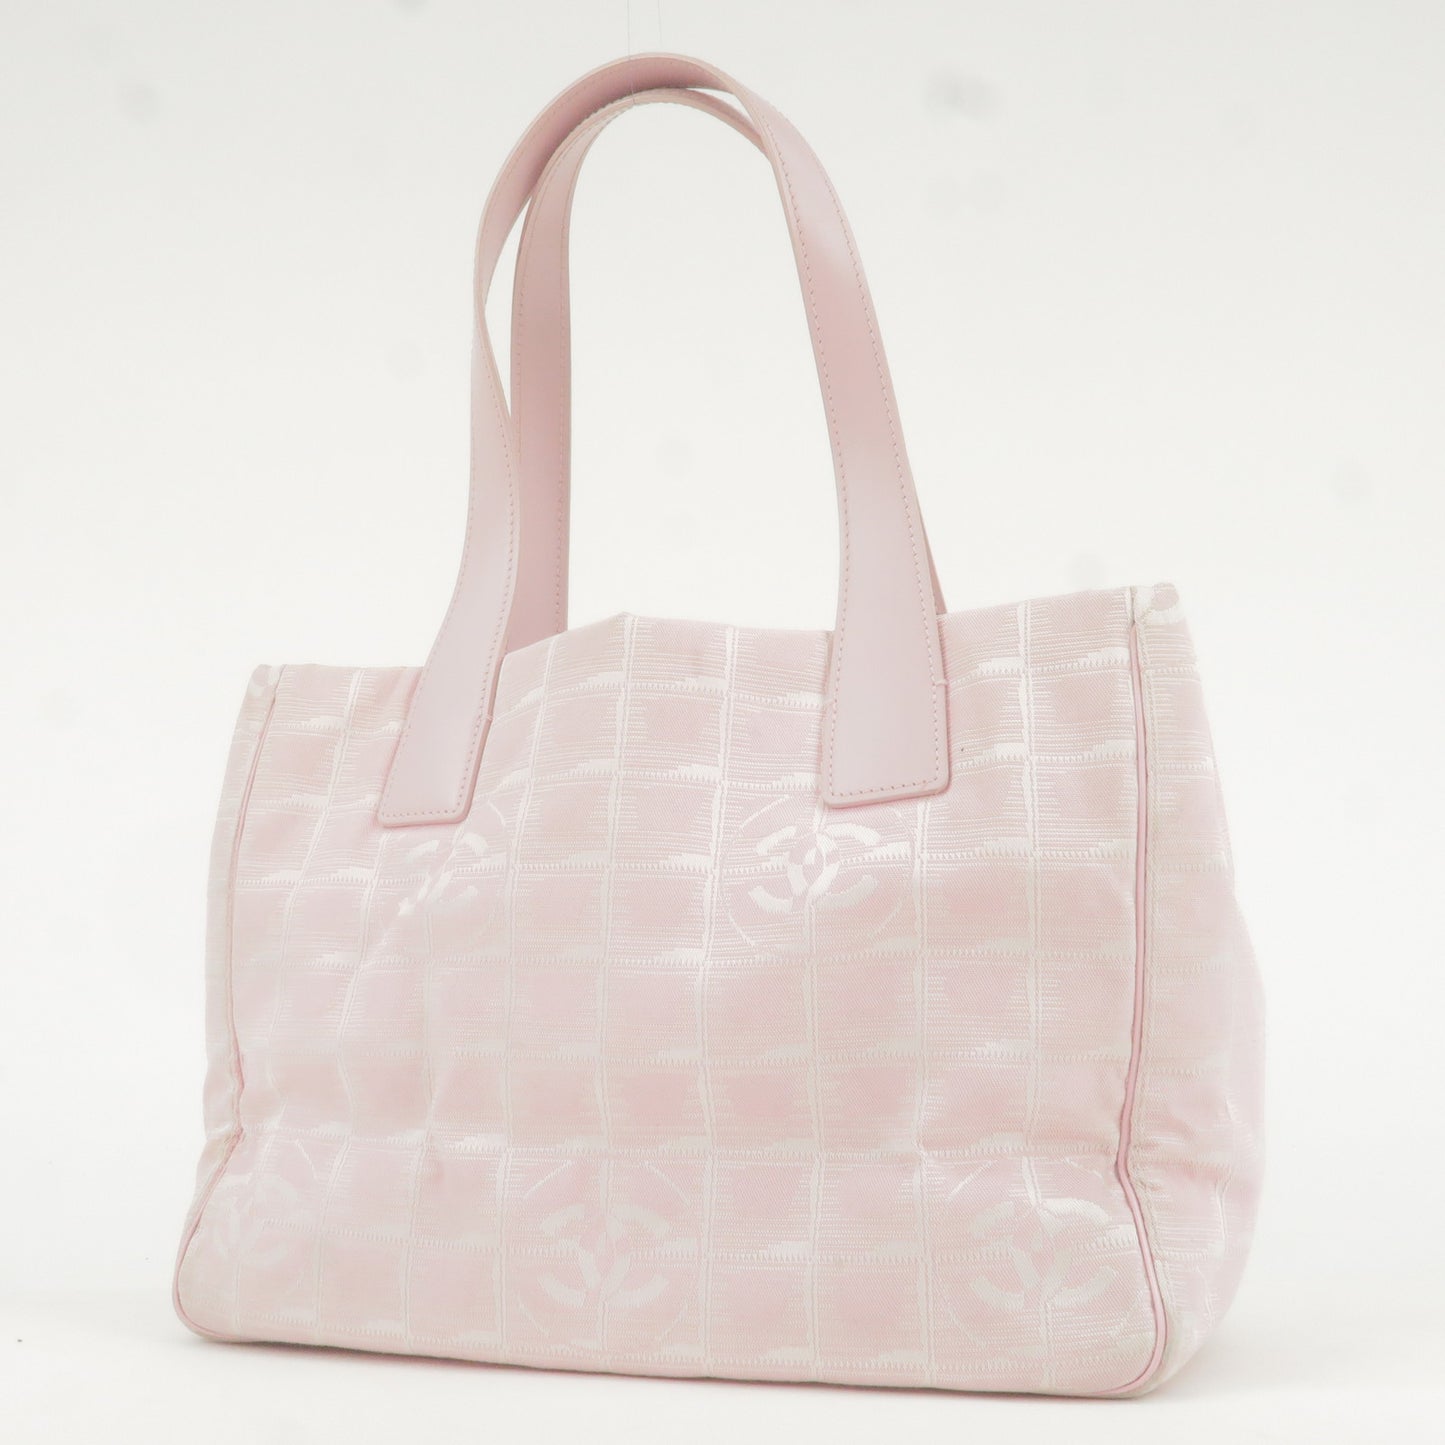 CHANEL Travel Line Nylon Jacquard Leather Tote PM Pink A20457